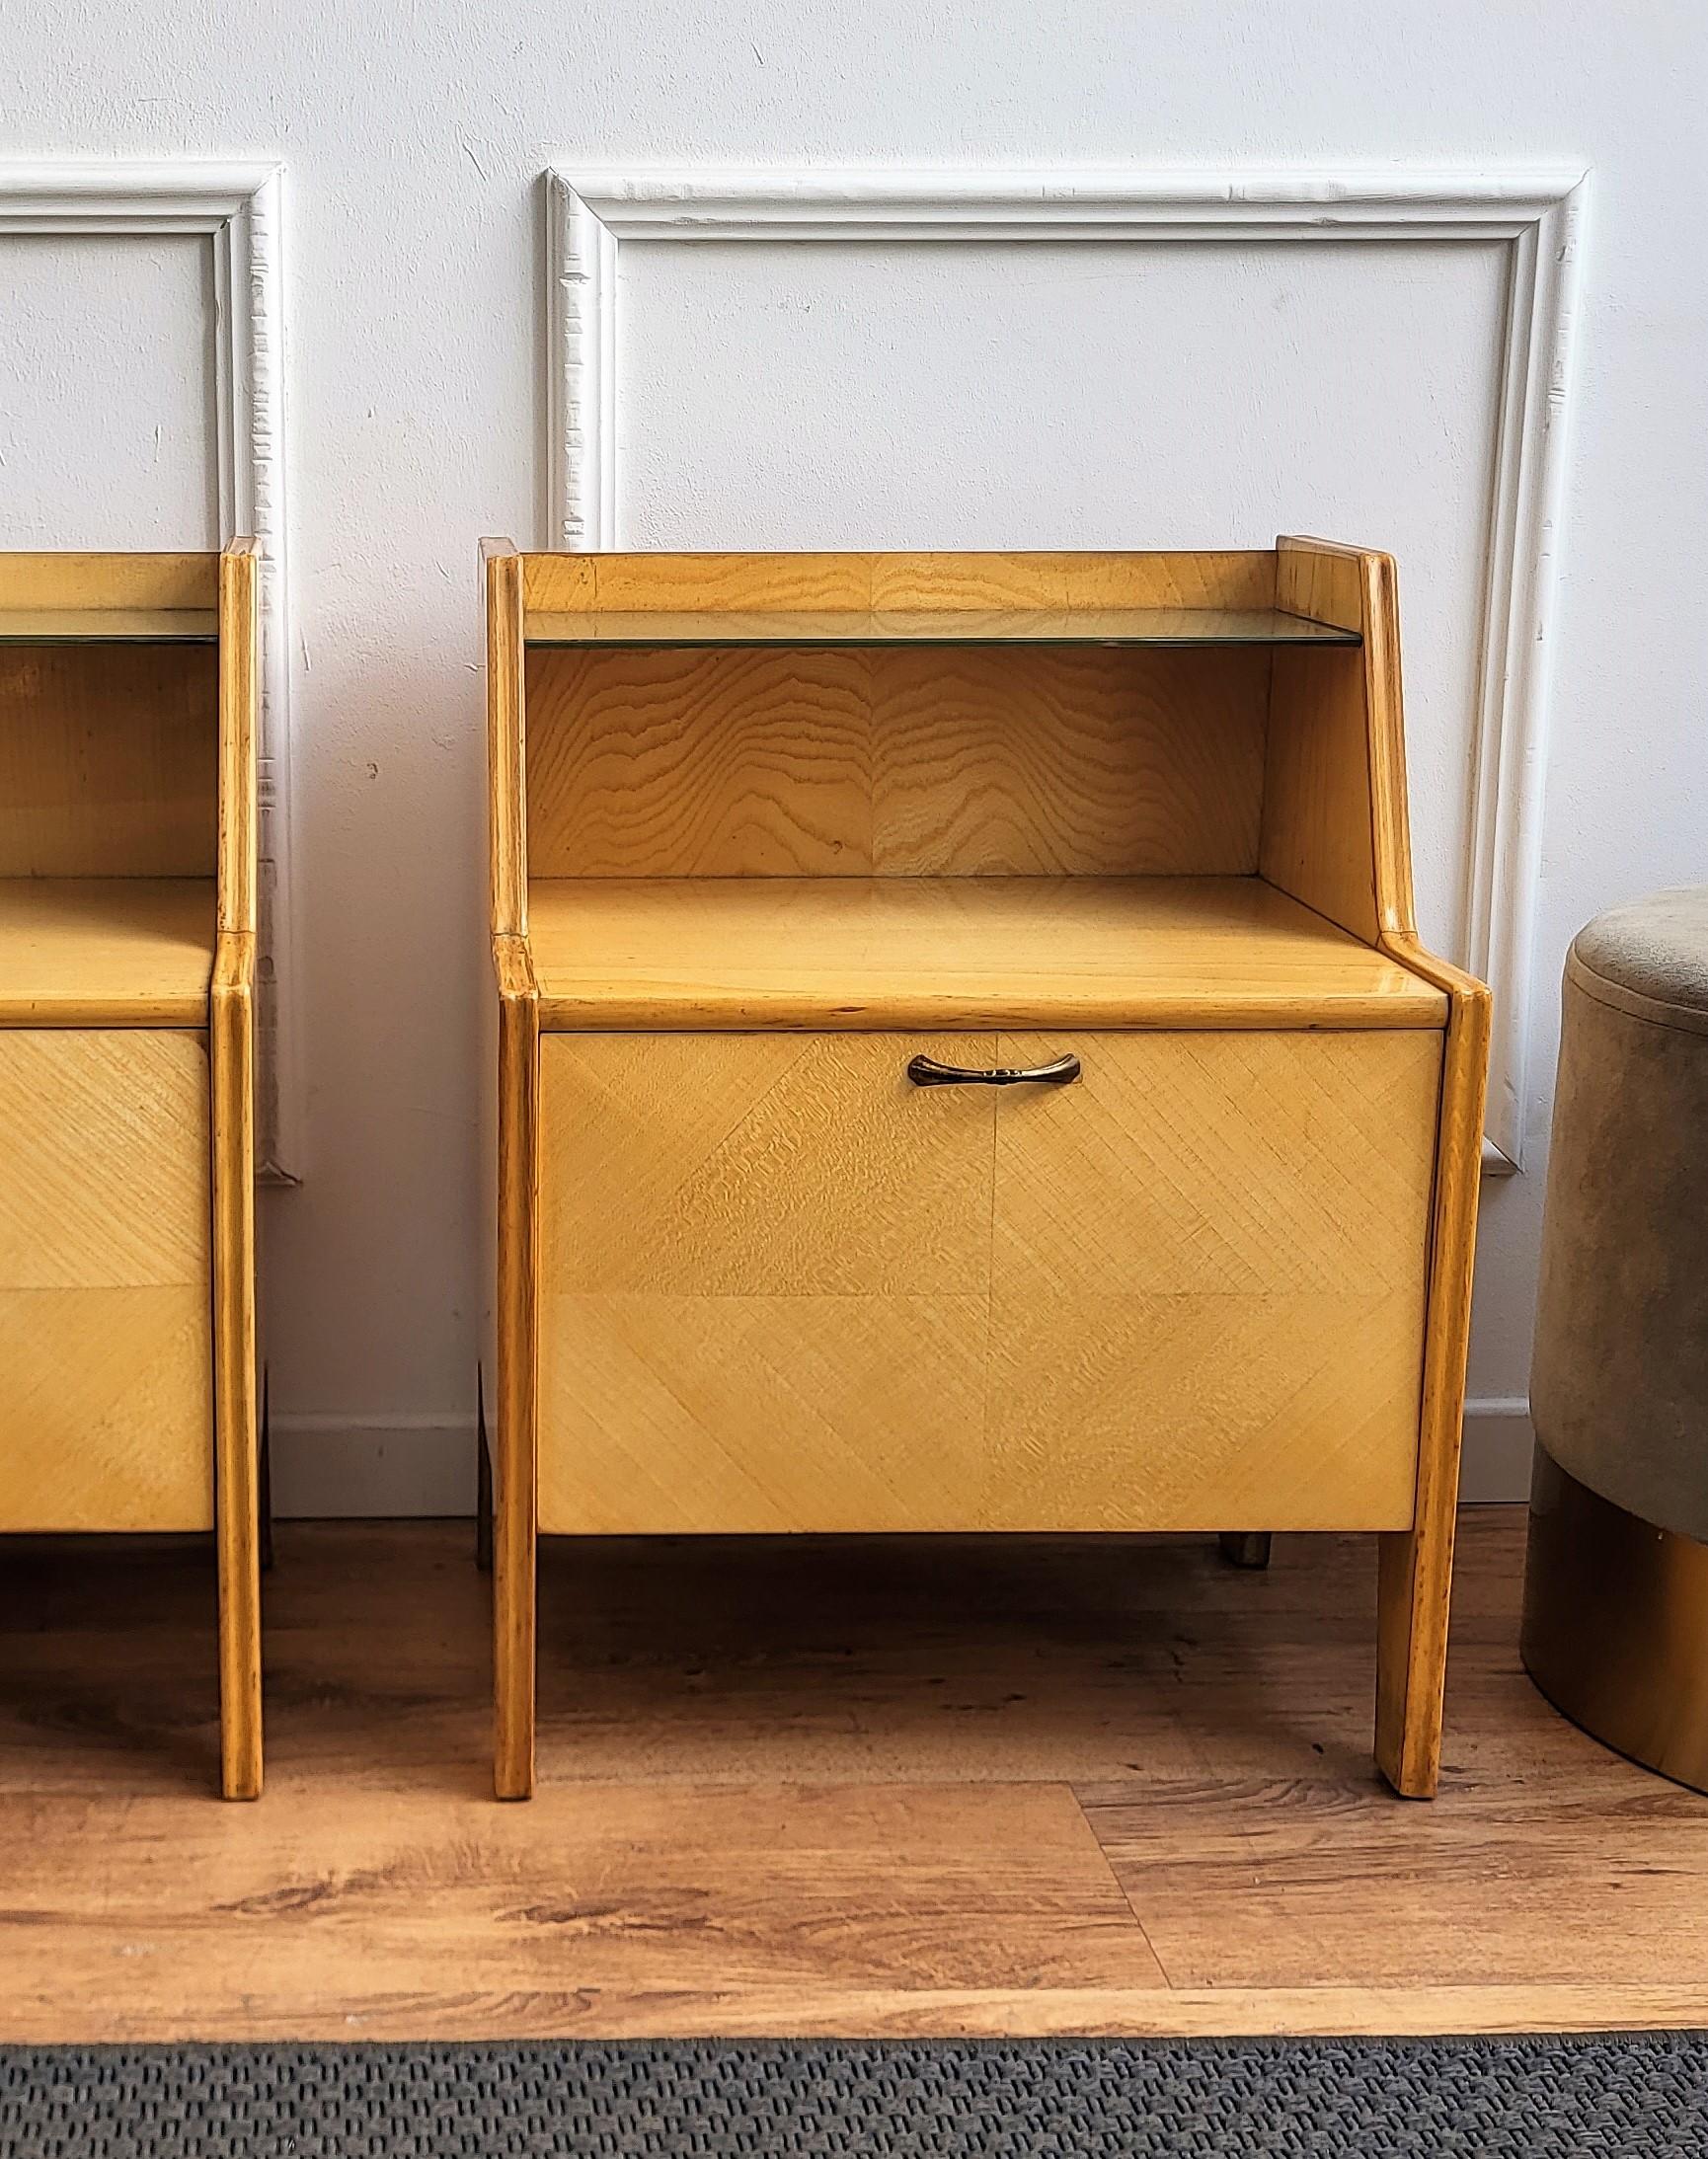 20th Century Pair of Italian Mid-Century Modern Nightstands Bedside Tables Maple & Glass Top For Sale